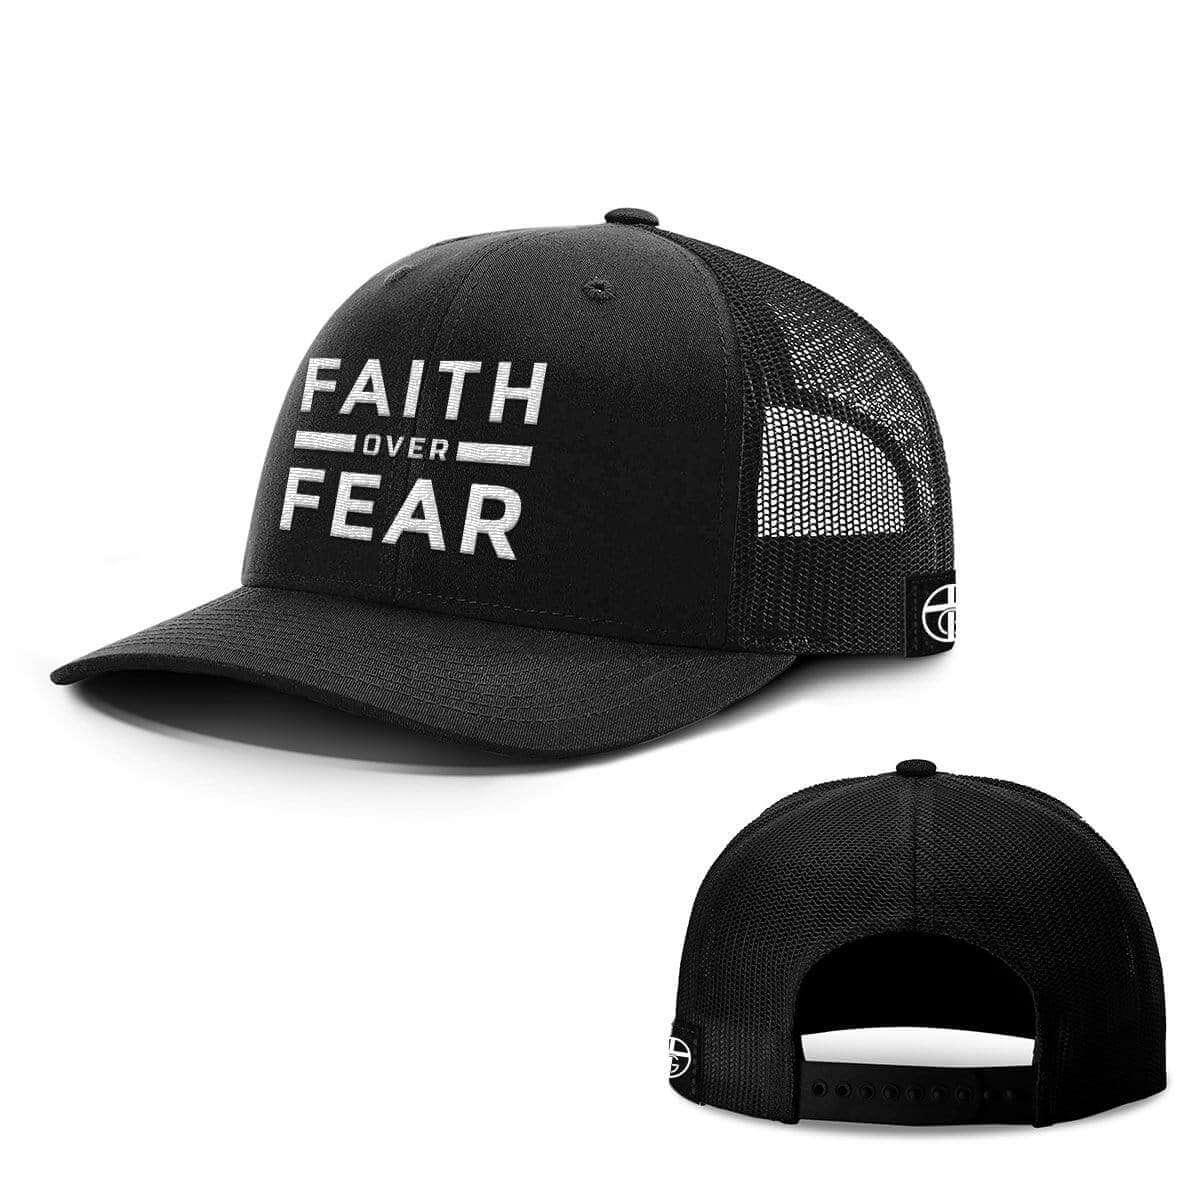 Mens Christian Hats Leather Patch Hats Christian Mens Snapback